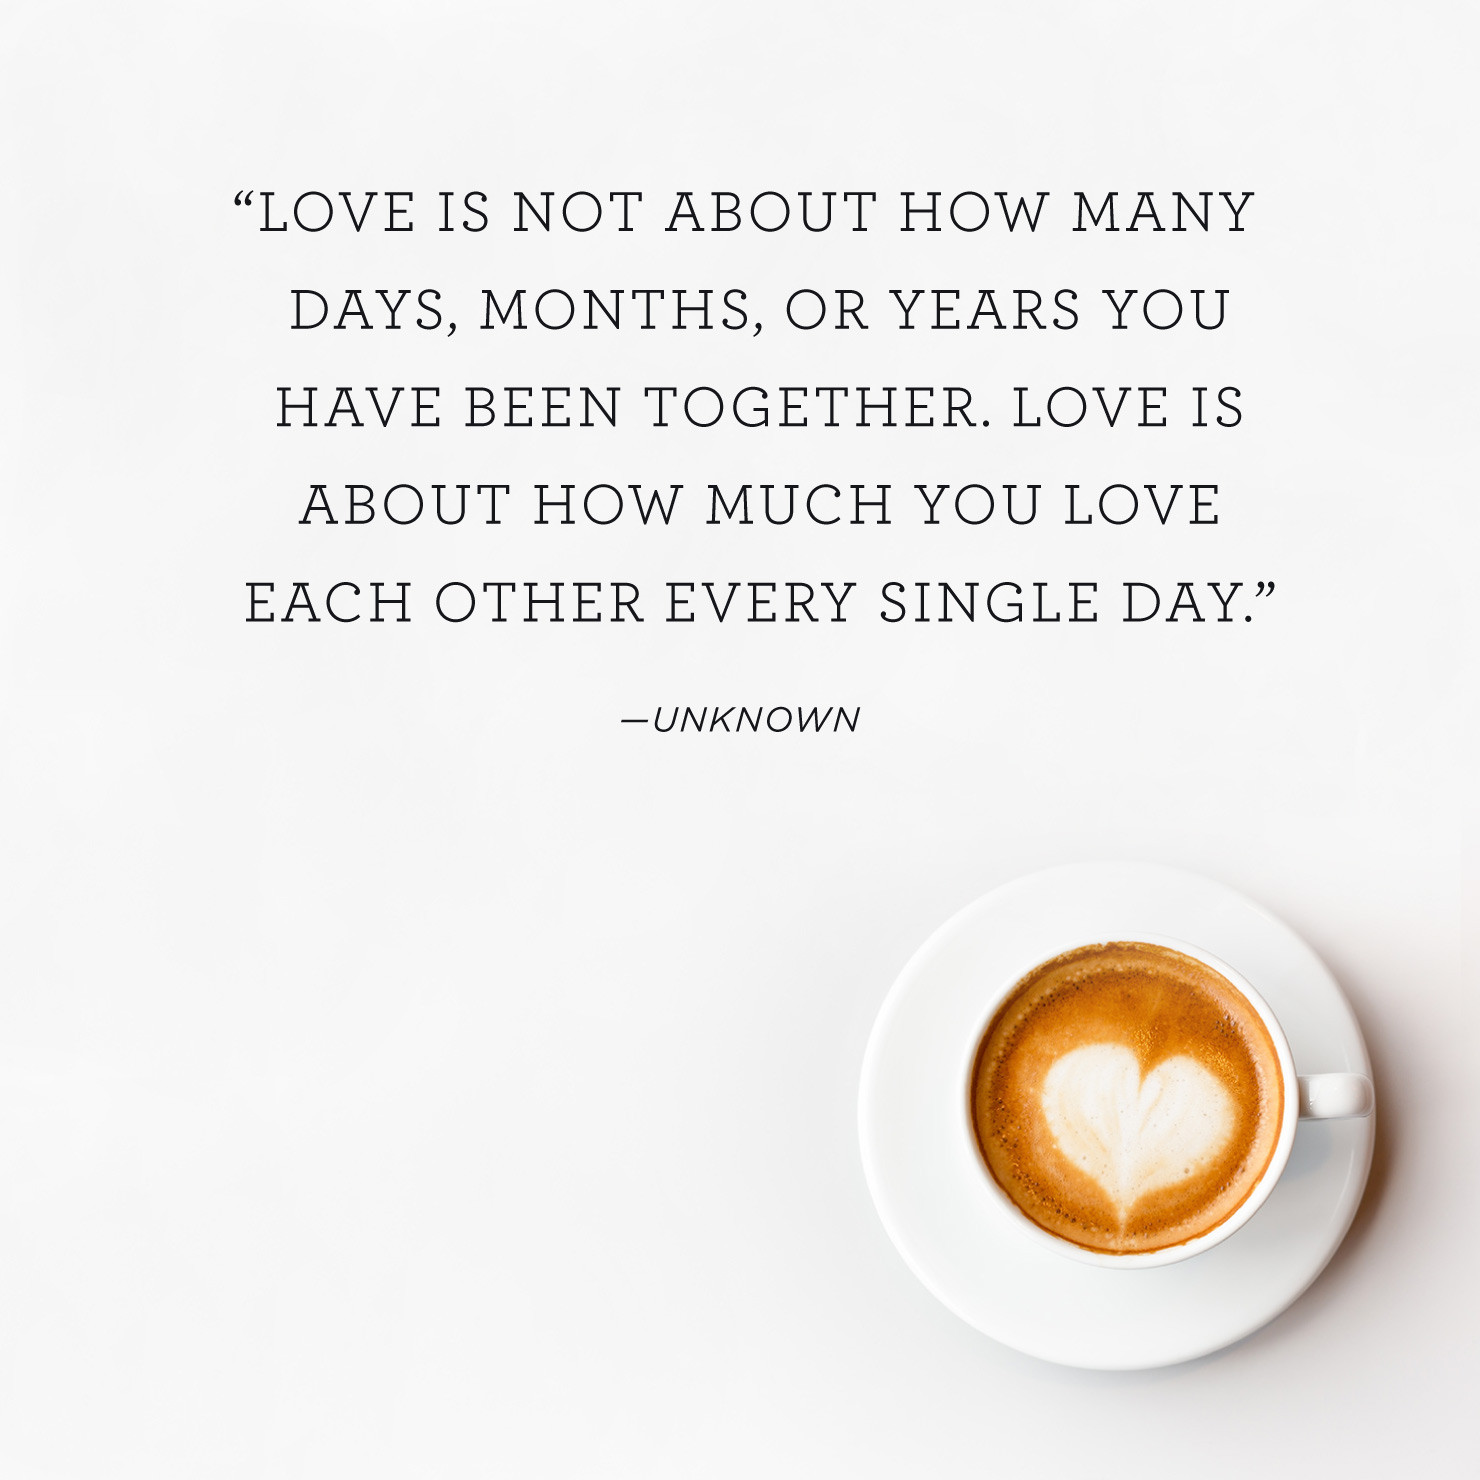 Anniversary Love Quotes
 60 Happy Anniversary Quotes to Celebrate Your Love